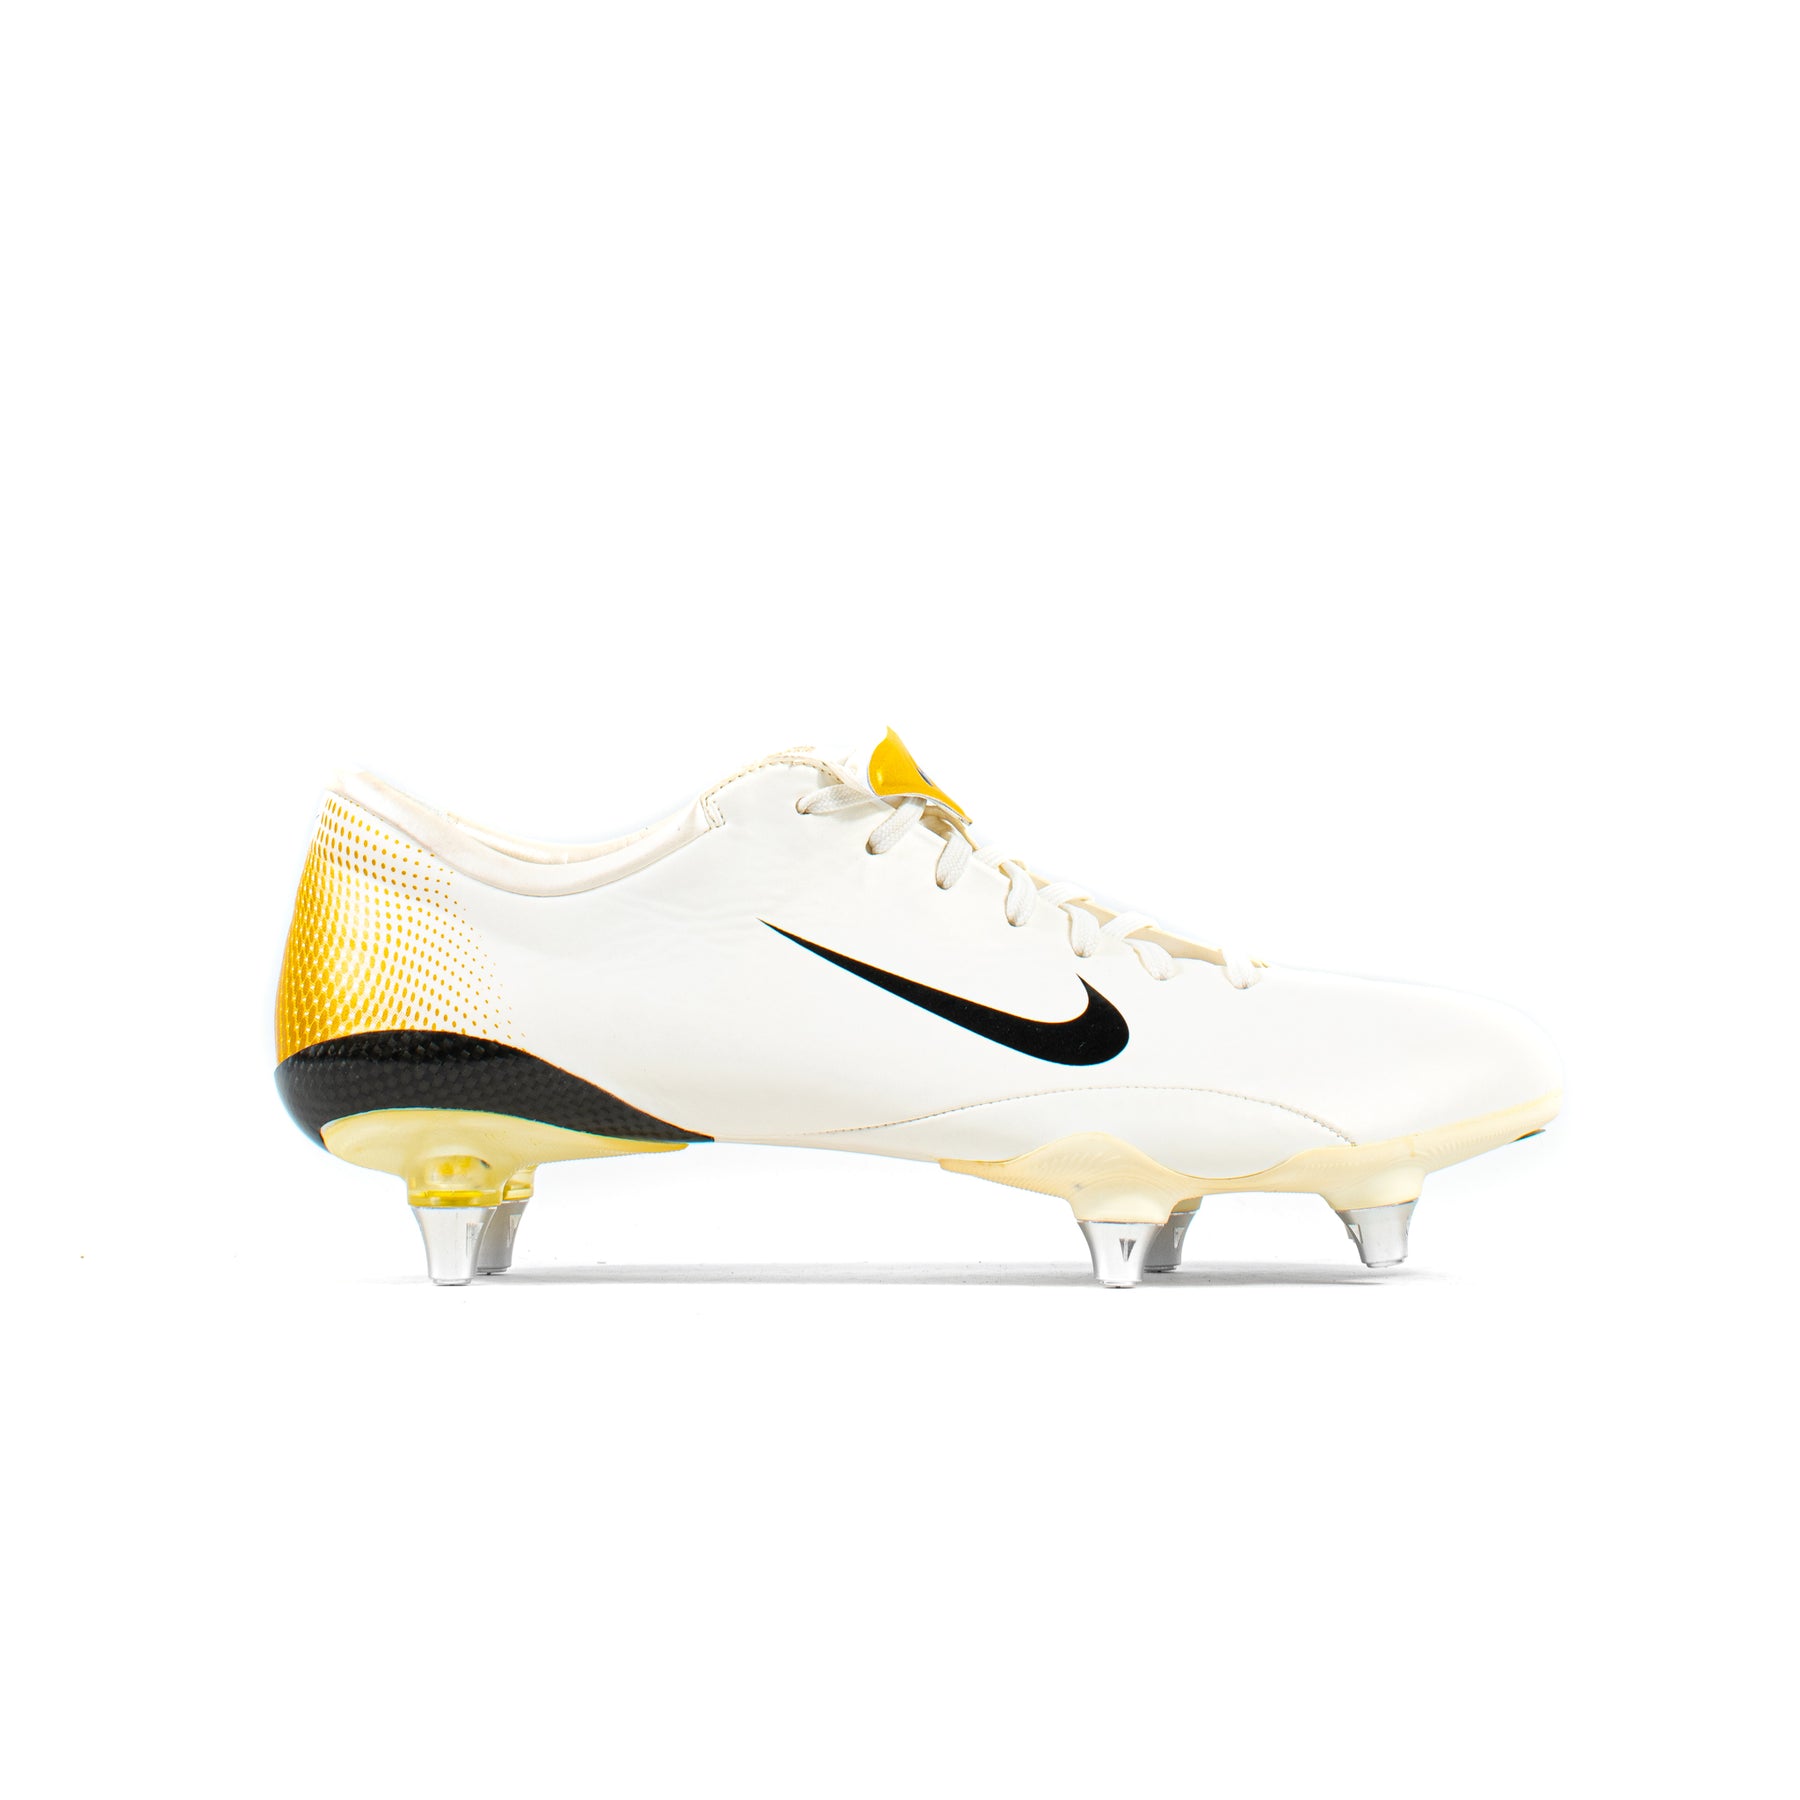 Mercurial Vapor III White Gold SG – Classic Soccer Cleats